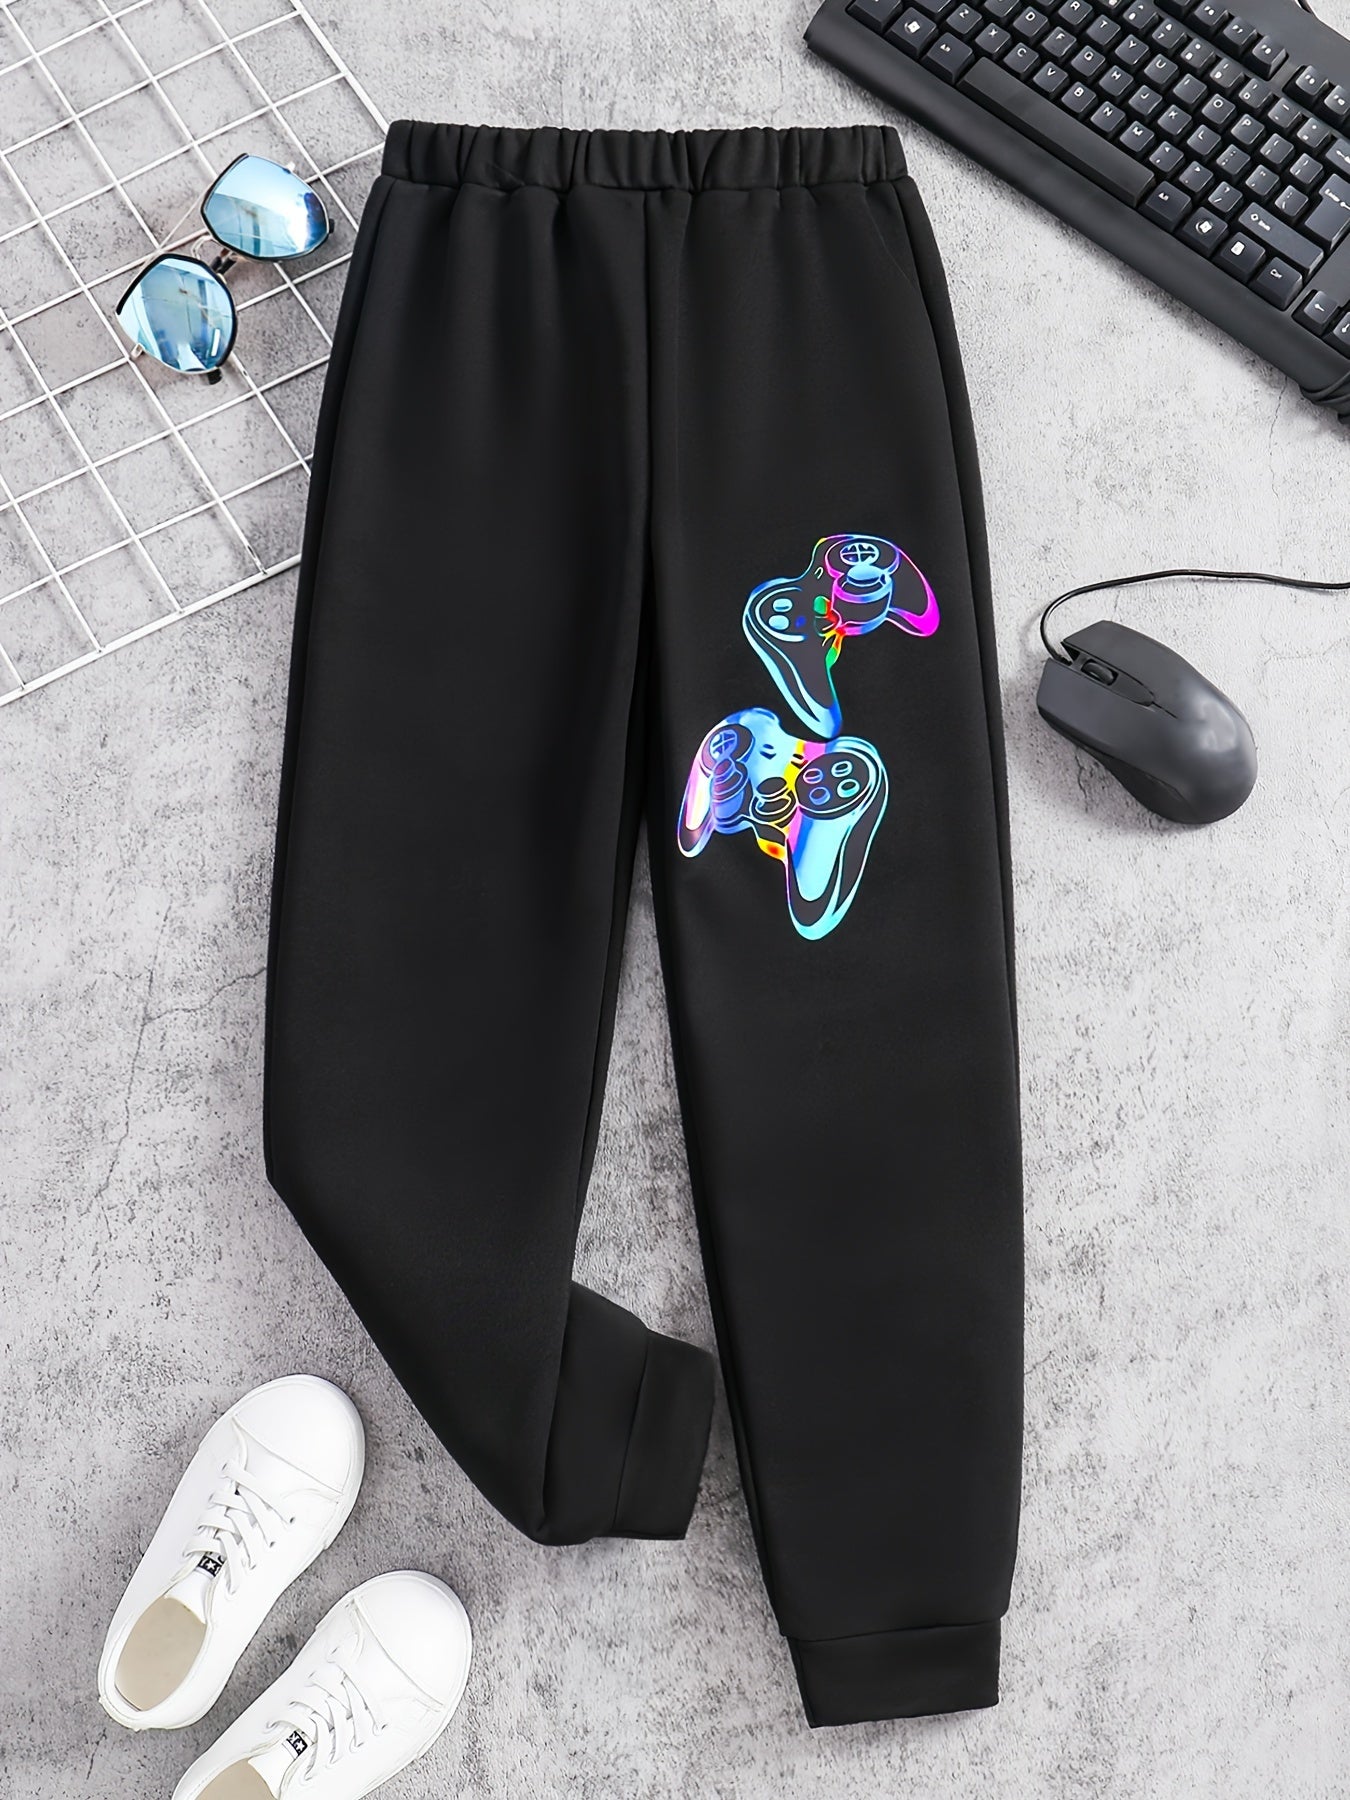 Kid's Game Console Print Sweatpants, Elastic Waist Jogger Pants, Boy's Clothes For Spring Fall Winter, As Gift